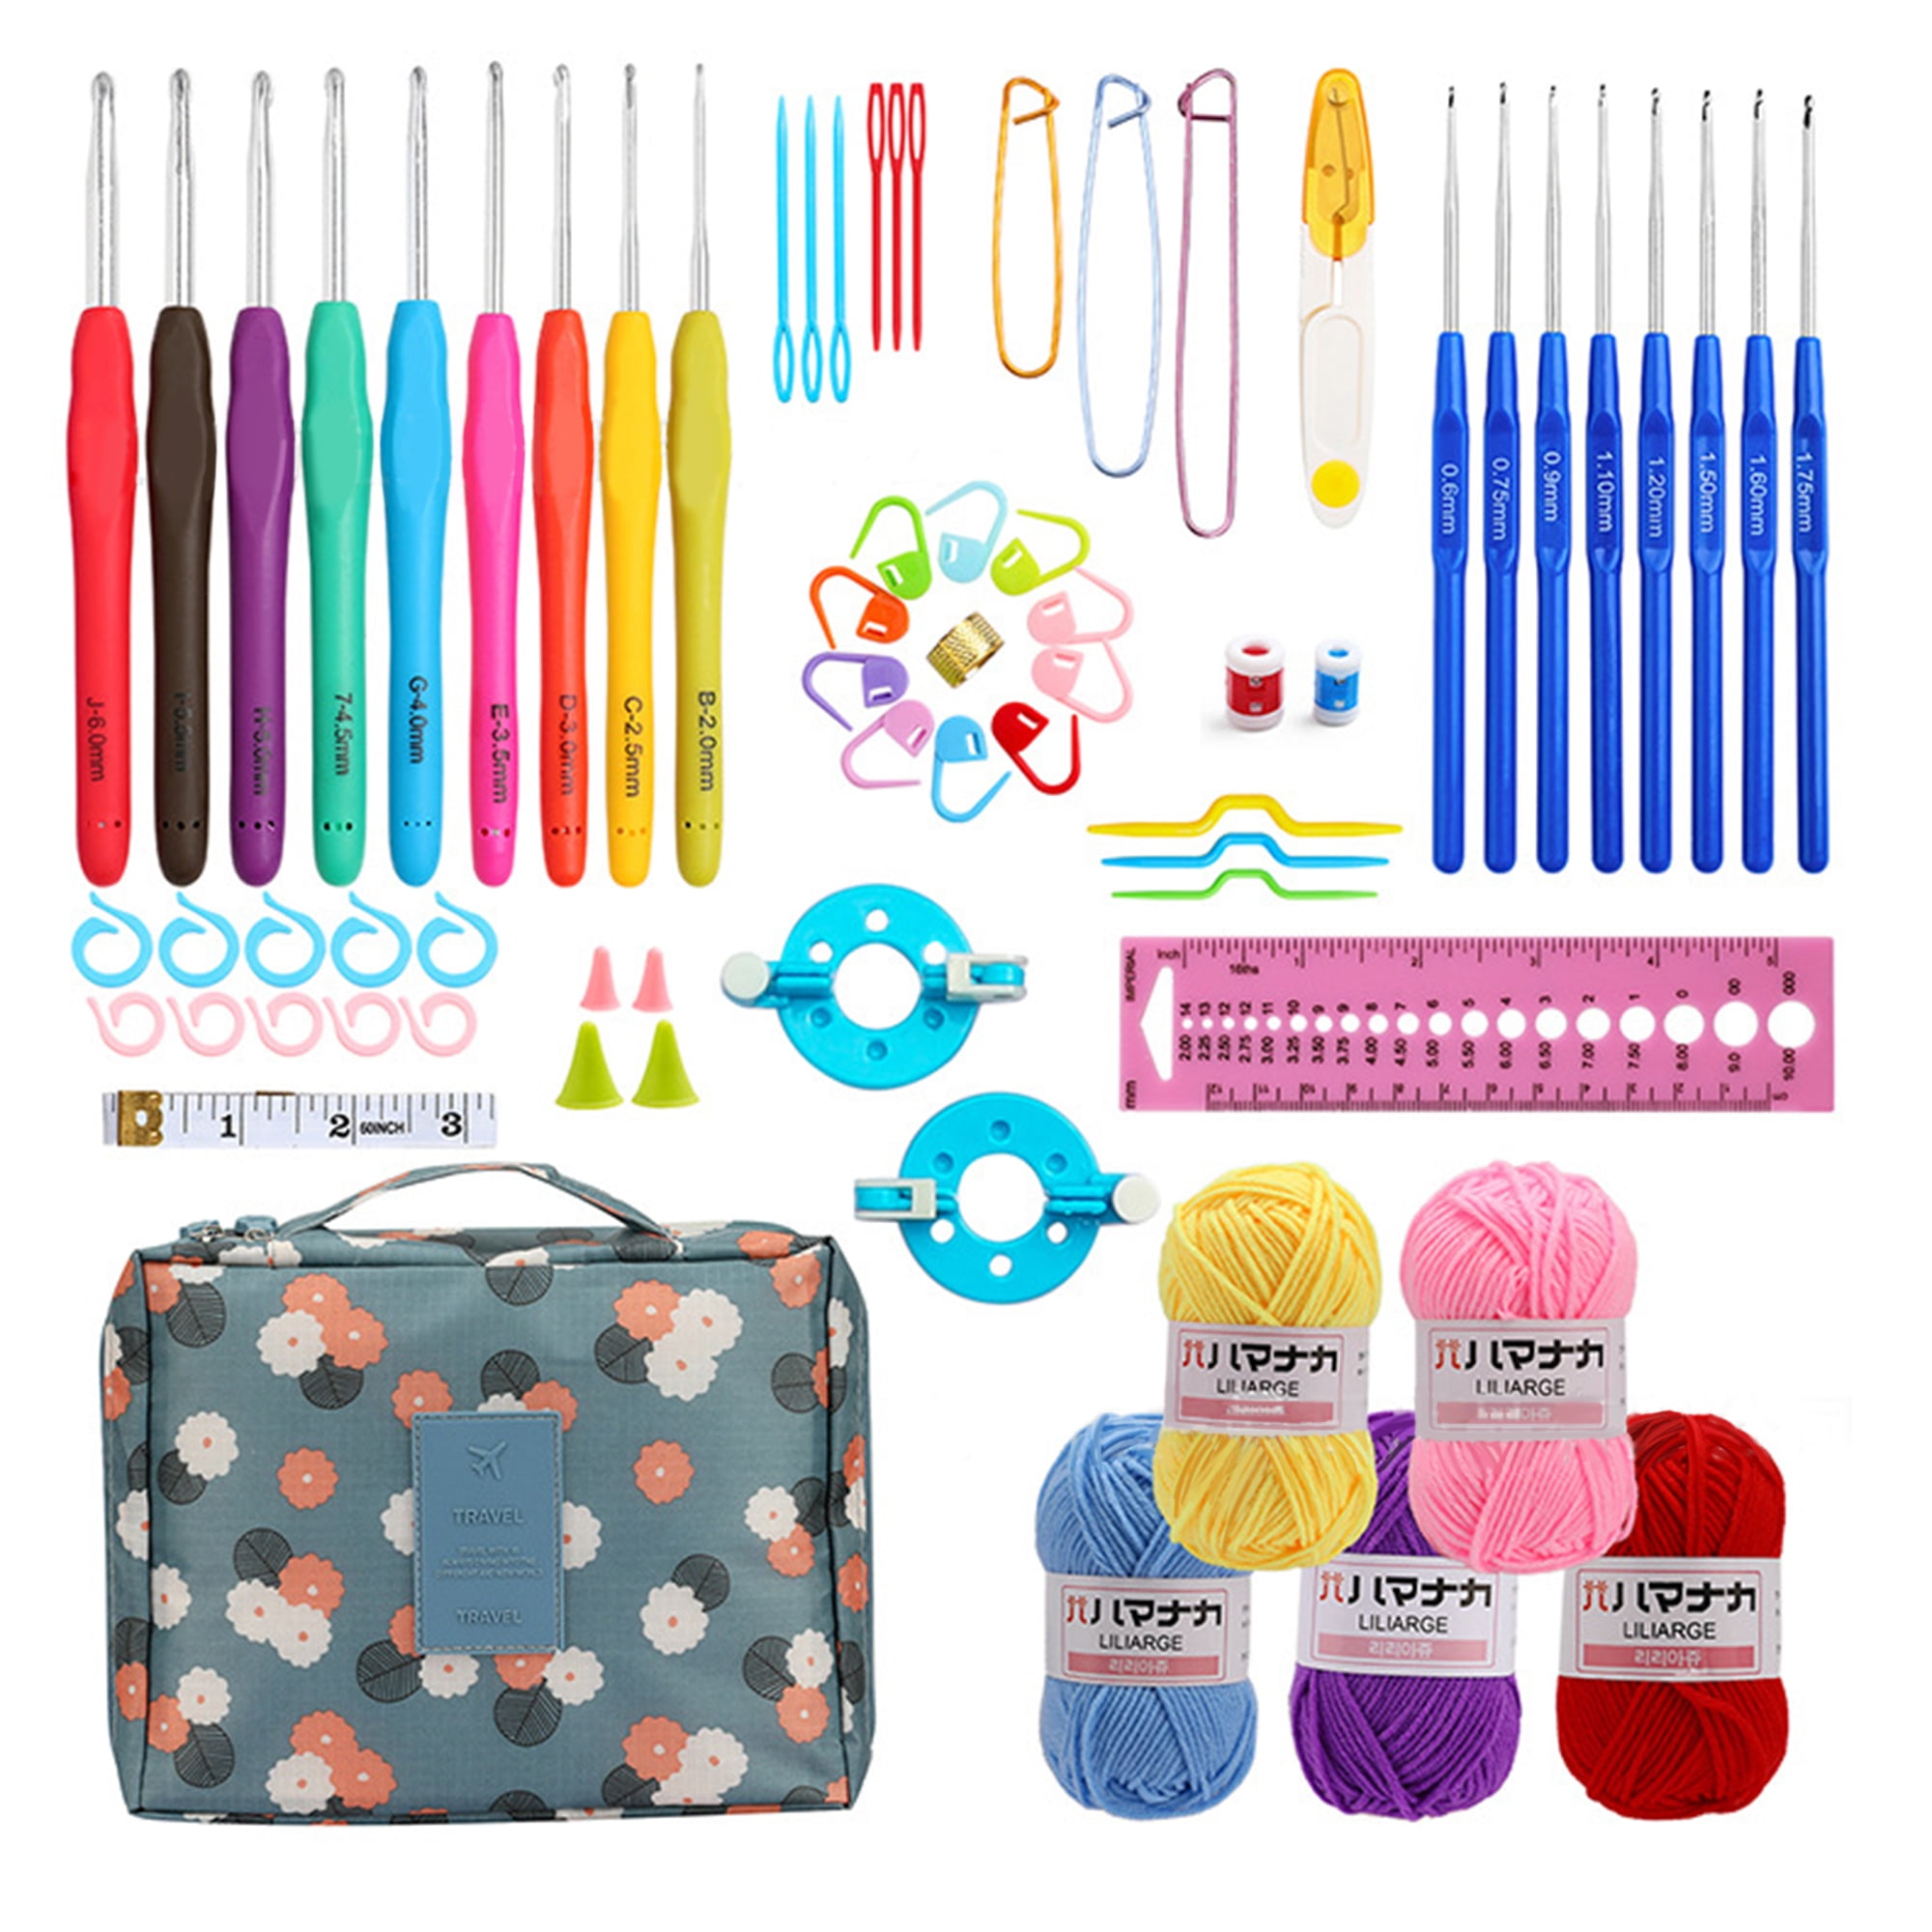 67 Pcs Crochet Hook Set with Case Globalstore Crochet Kit with Yarn,  Ergonomic Crochet Kits Include 5 Roll Yarn, Knitting Needles and Other  Supplies, Full Crochet Starter Kit for Beginners Adults 